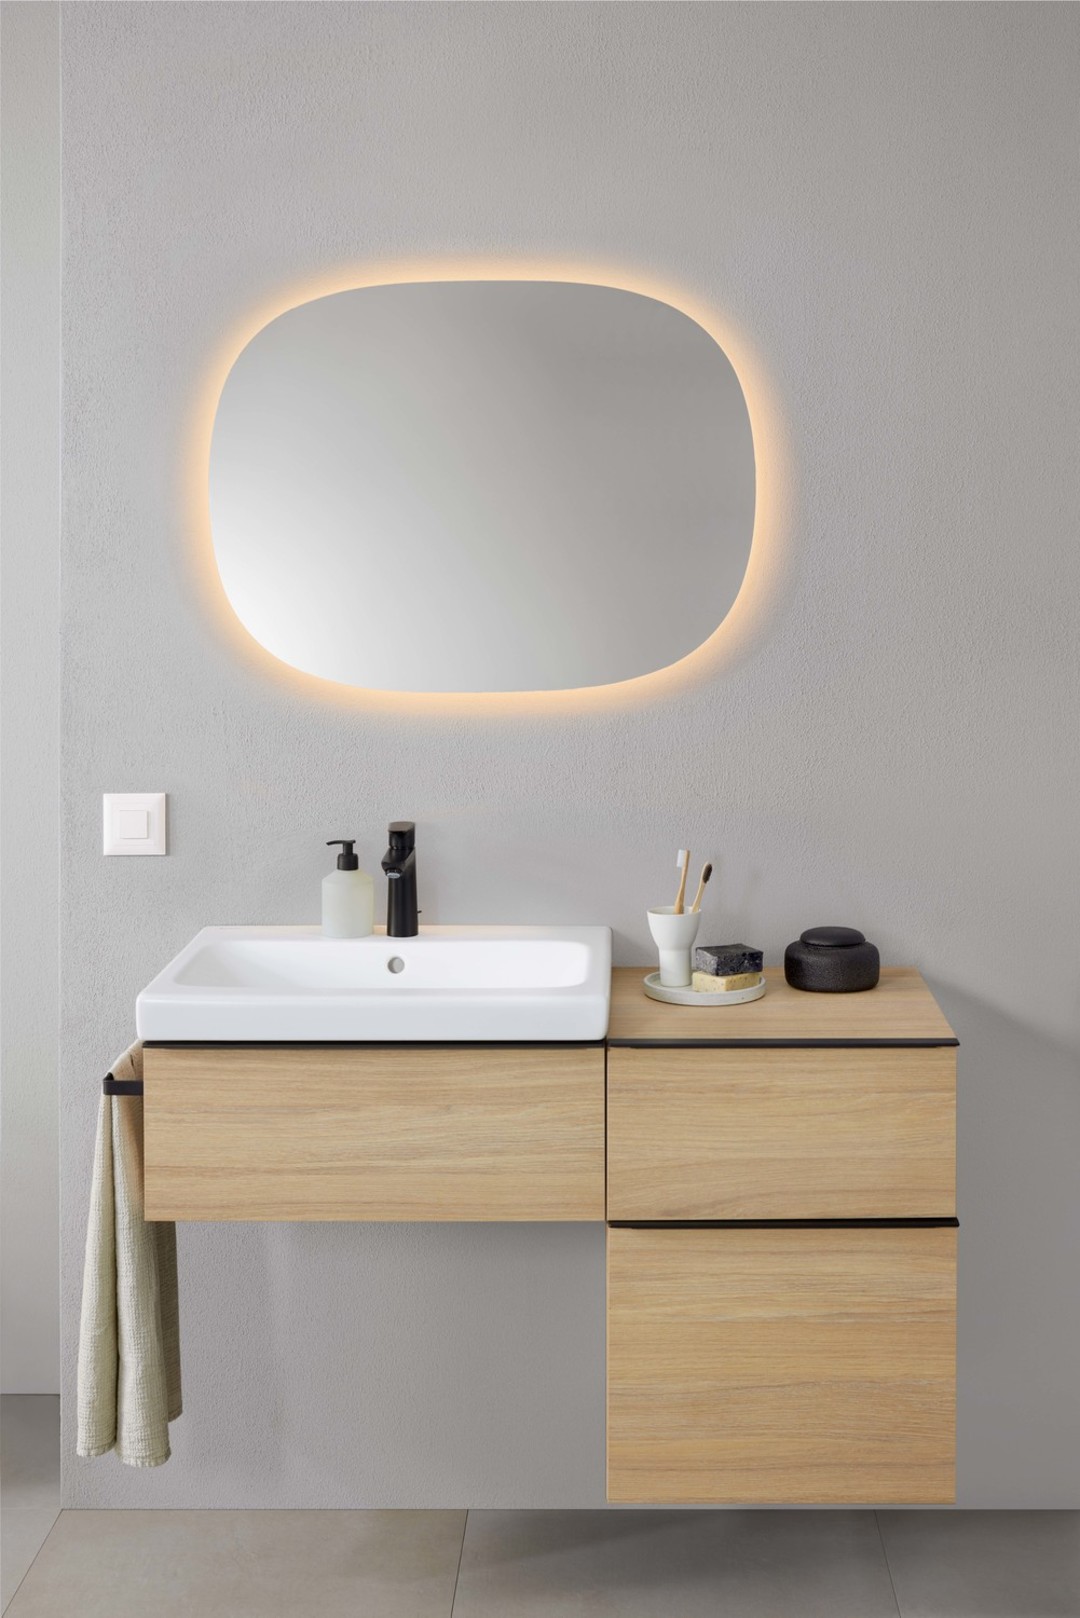 2023_iCon Bathroom with washplace and Option Mirror Oval cross_light on_with separate switch_Original.jpg